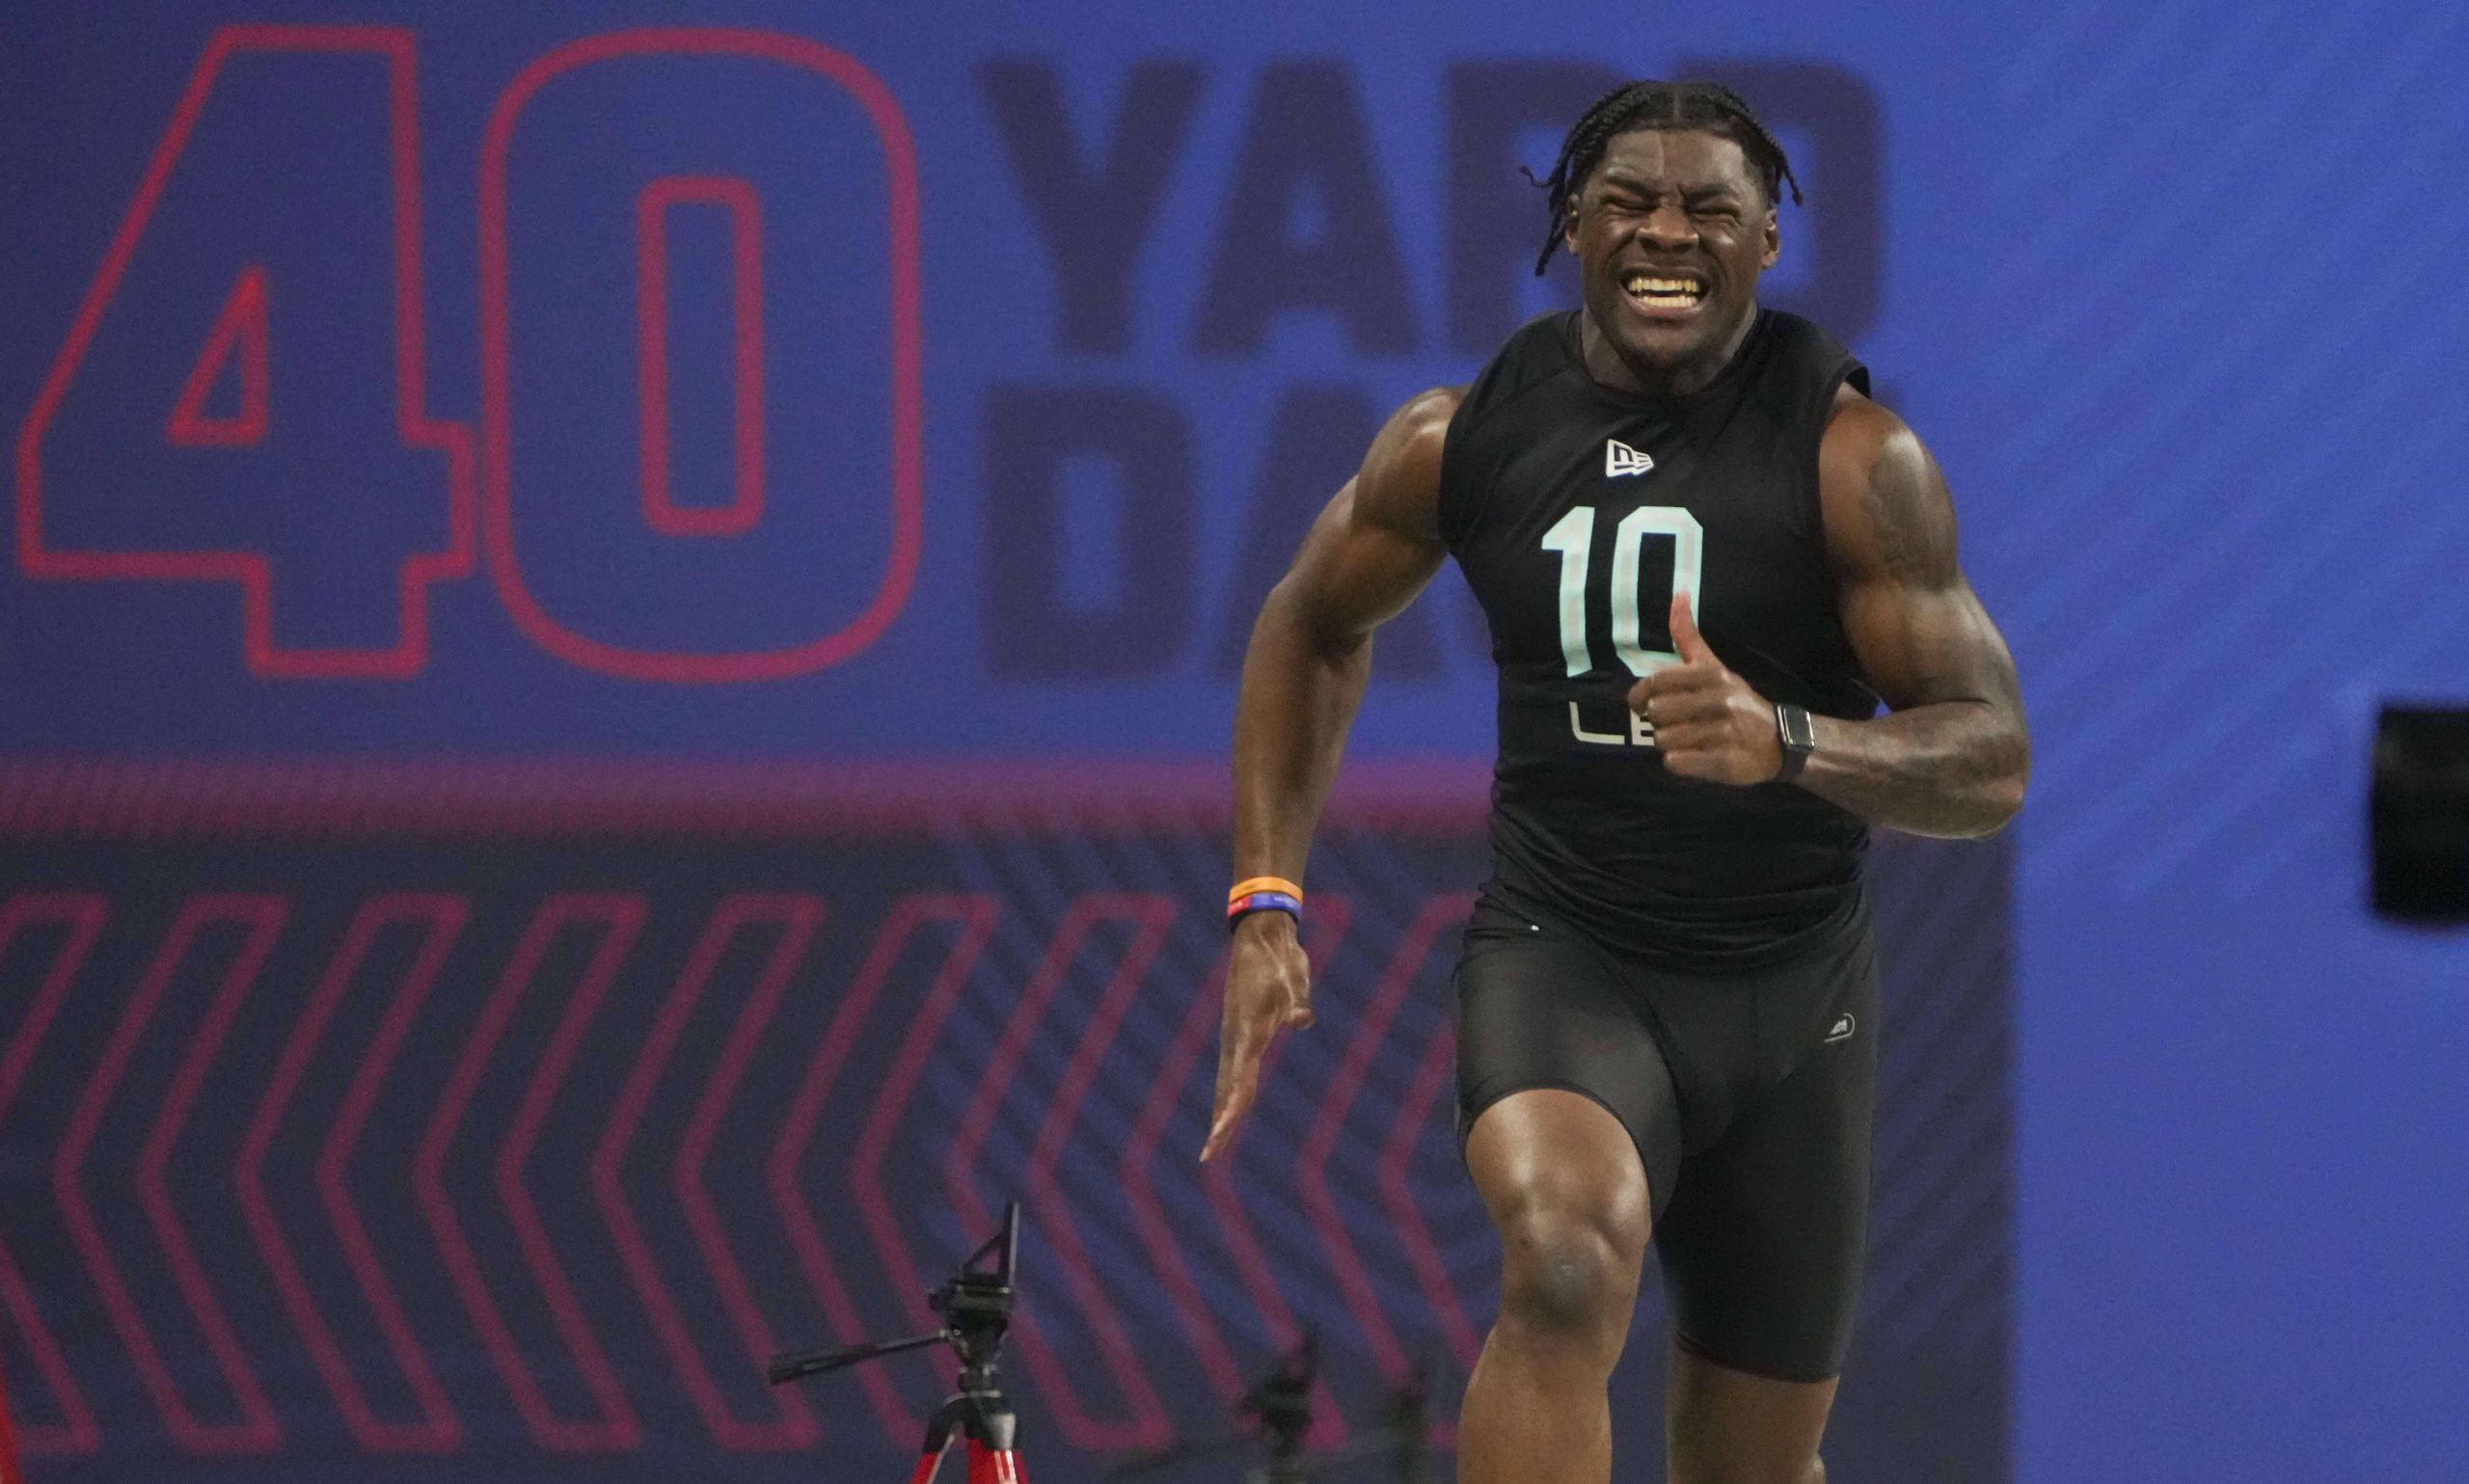 NFL, American Football Herren, USA Scouting Combine, Mar 5, 2022 Indianapolis, IN, USA Louisiana State linebacker Damone Clark LB10 runs the 40-yard dash during the 2022 NFL Scouting Combine at Lucas Oil Stadium. Mandatory Credit: Kirby Lee-USA TODAY Sports, 05.03.2022 20:11:35, 17838510, Lucas Oil Stadium, NPStrans, NFL, Scouting Combine, Damone Clark PUBLICATIONxINxGERxSUIxAUTxONLY Copyright: xKirbyxLeex 17838510